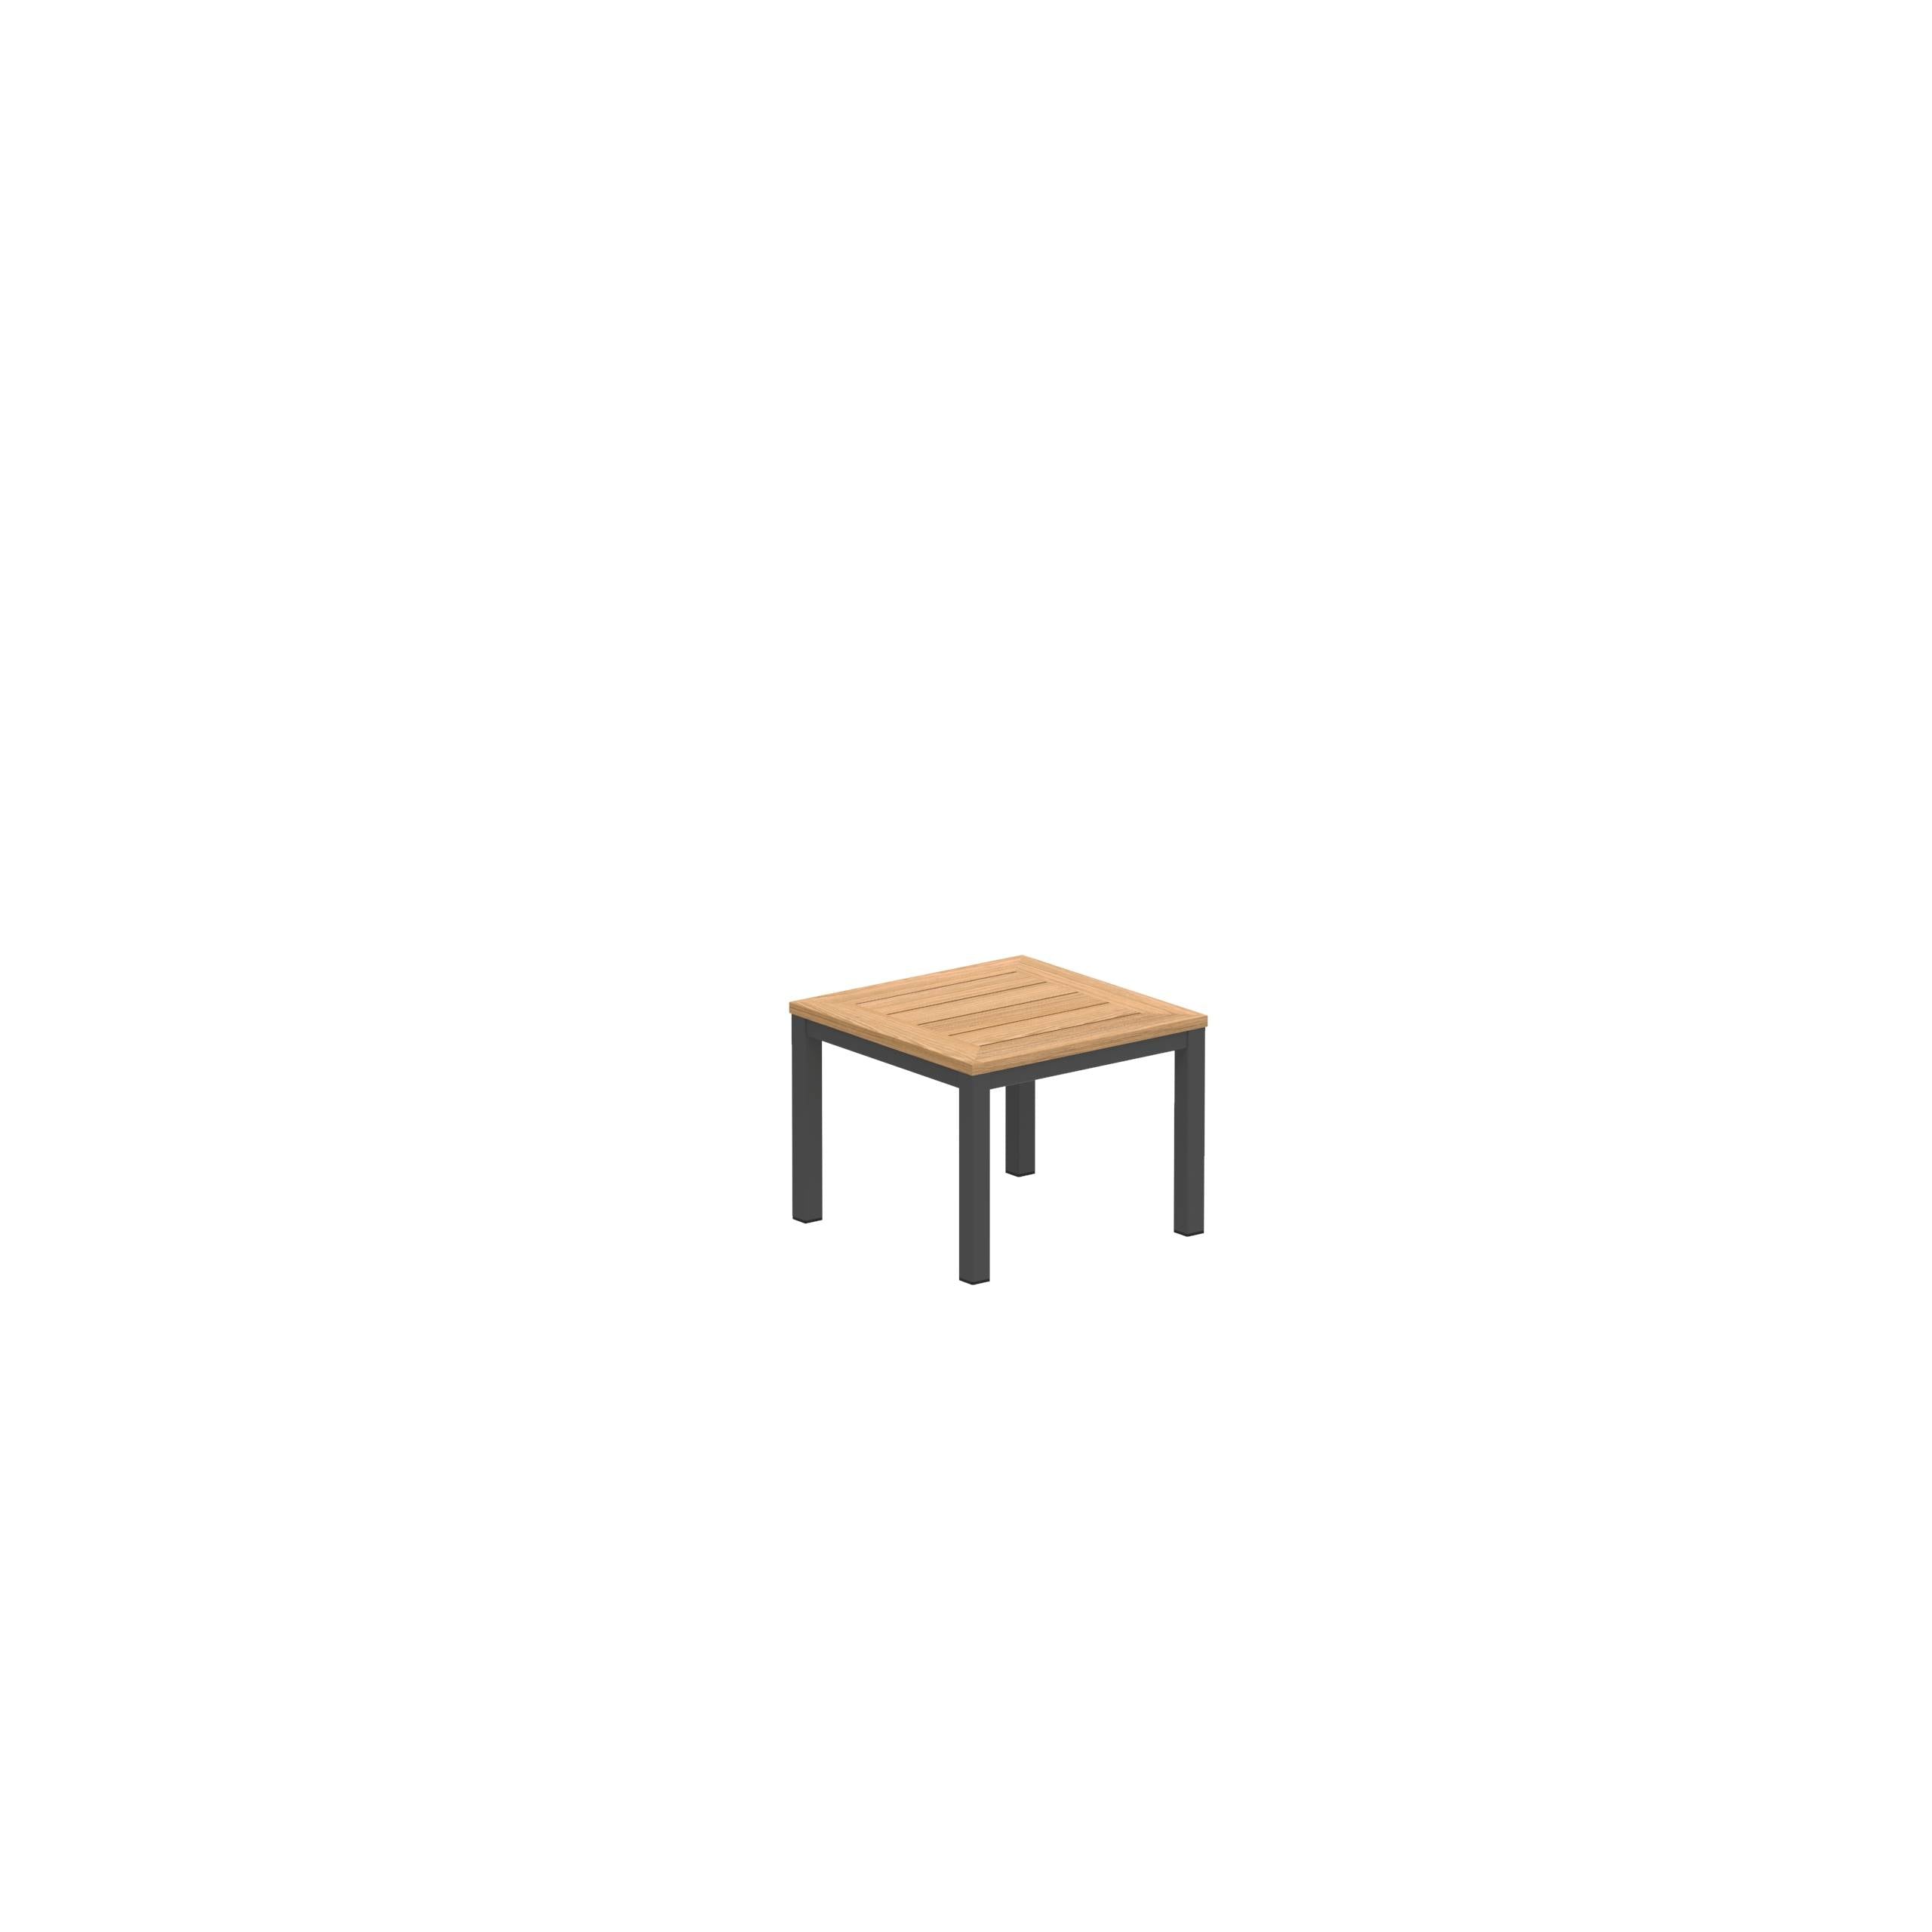 Taboela Table 50x50cm Anthracite With Teak Tabletop